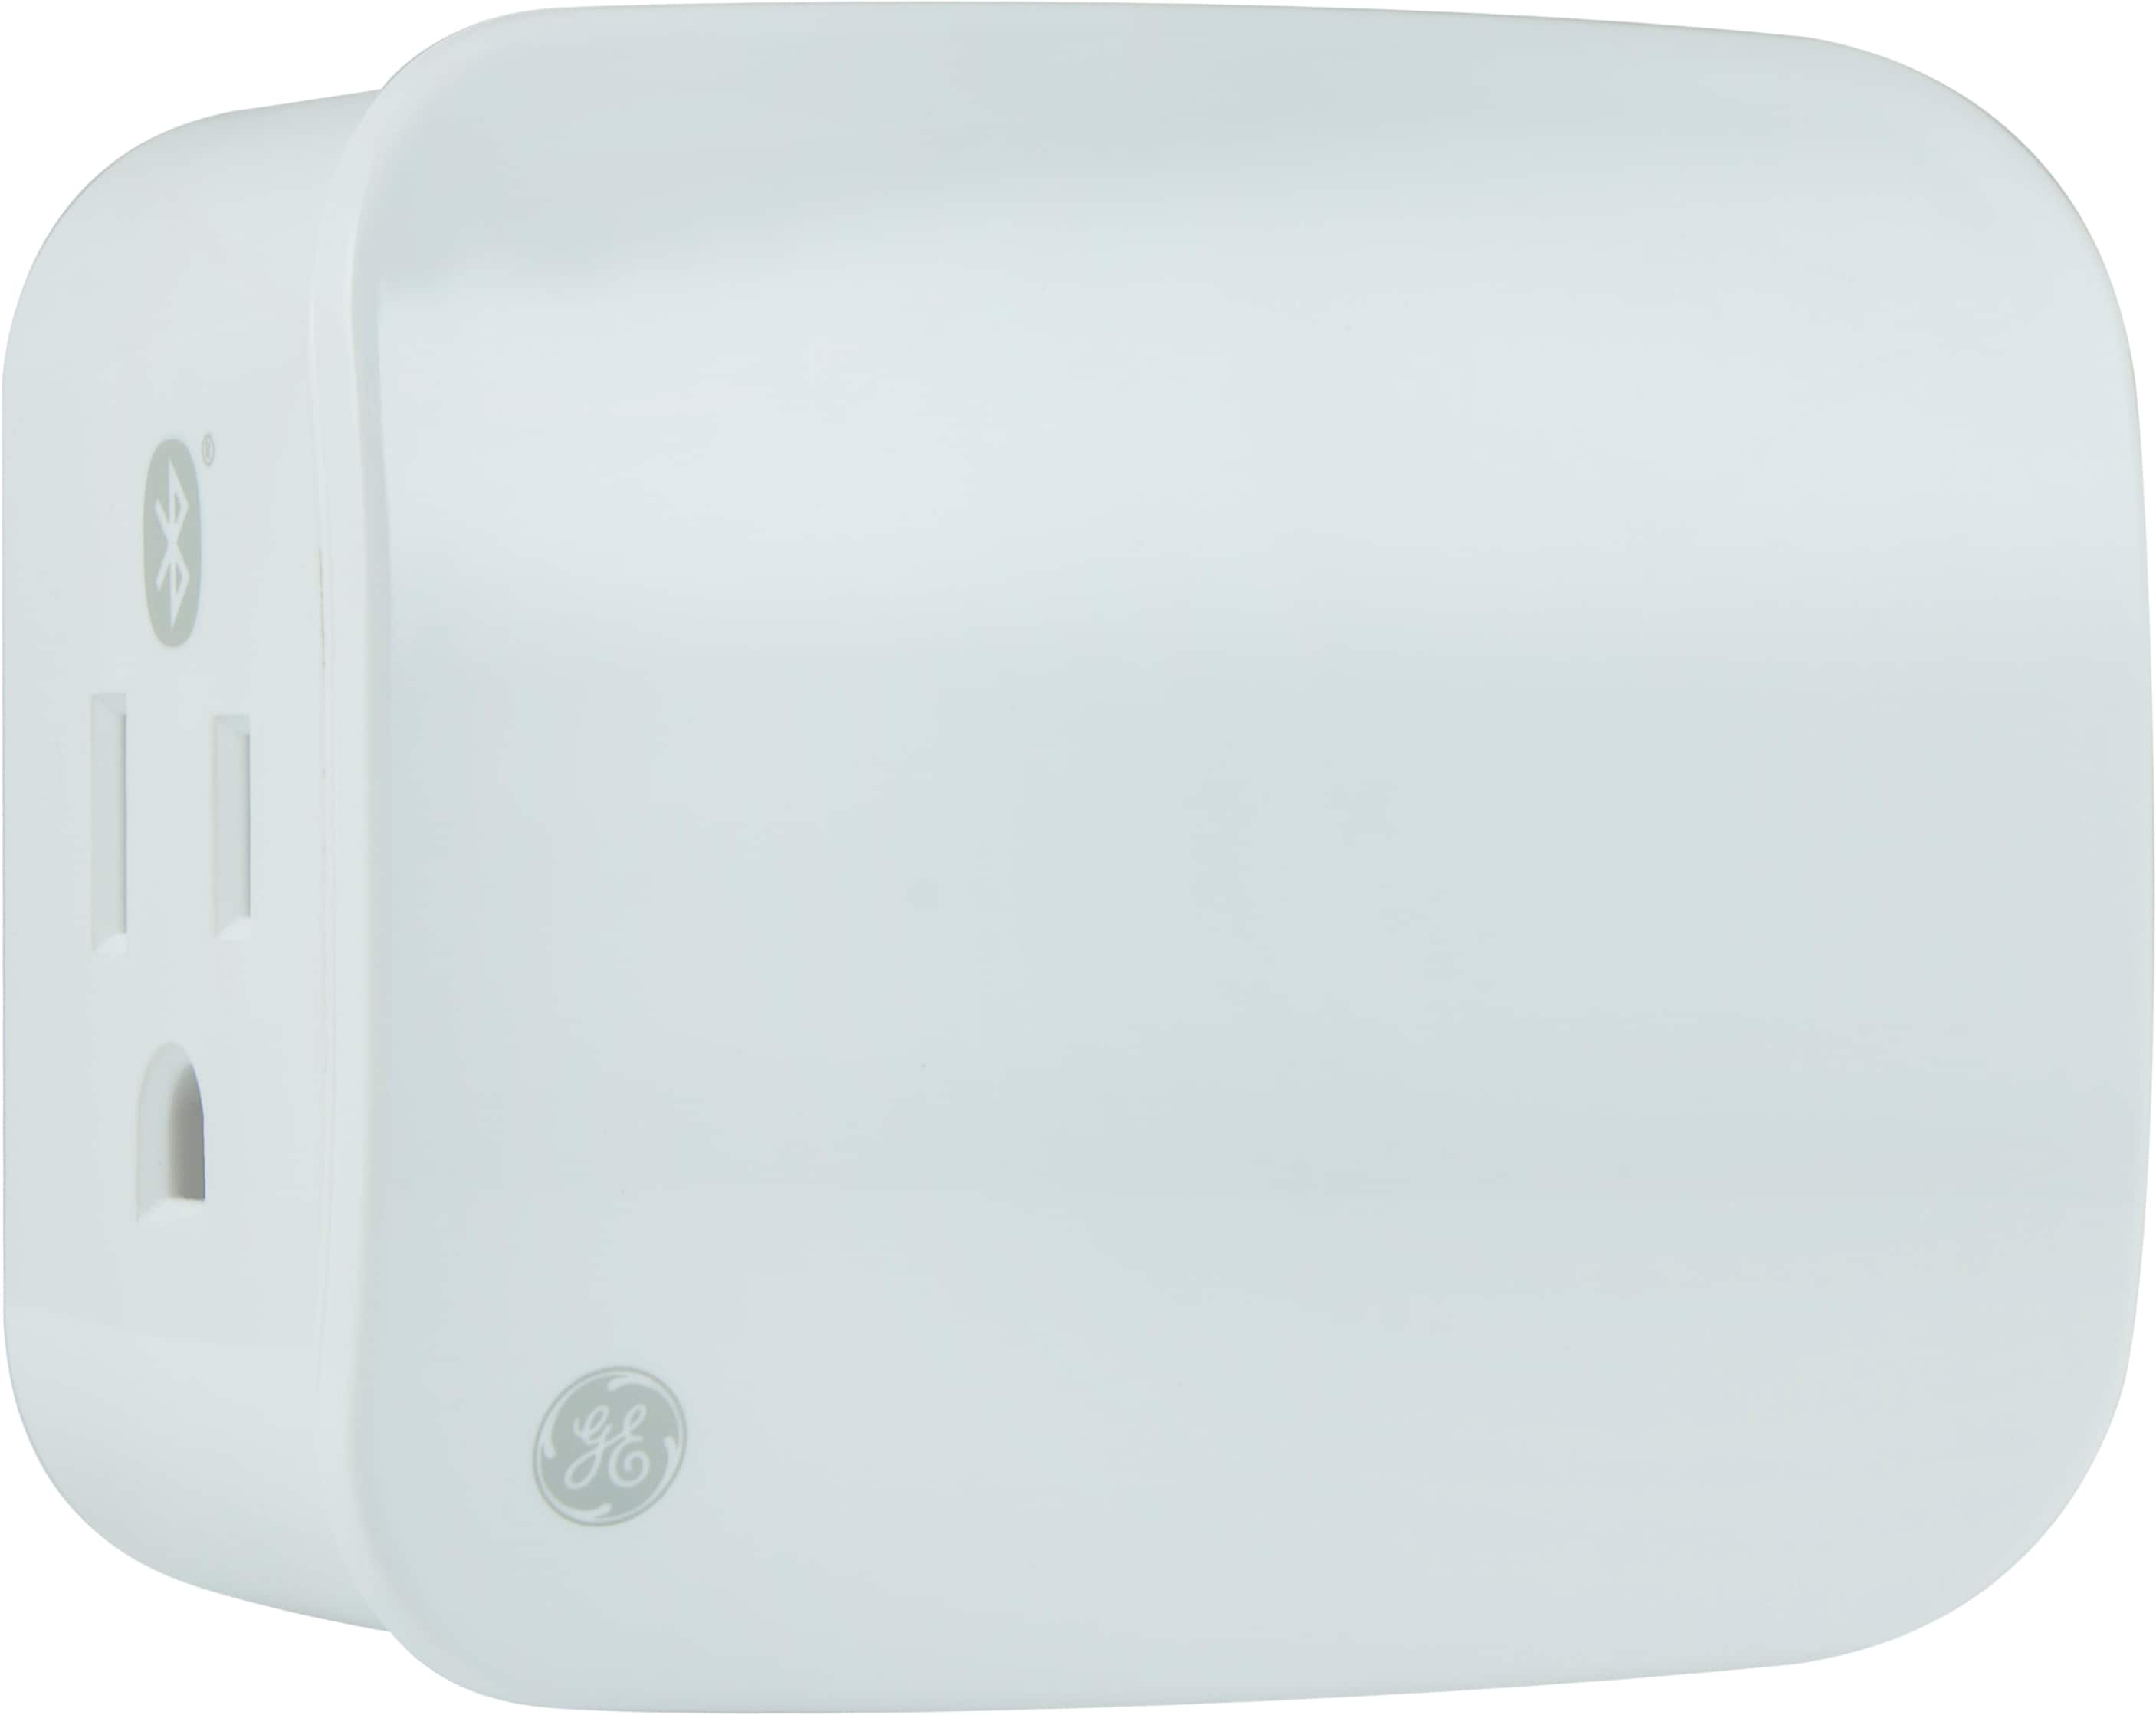 GE Bluetooth Outdoor Smart Switch Timer